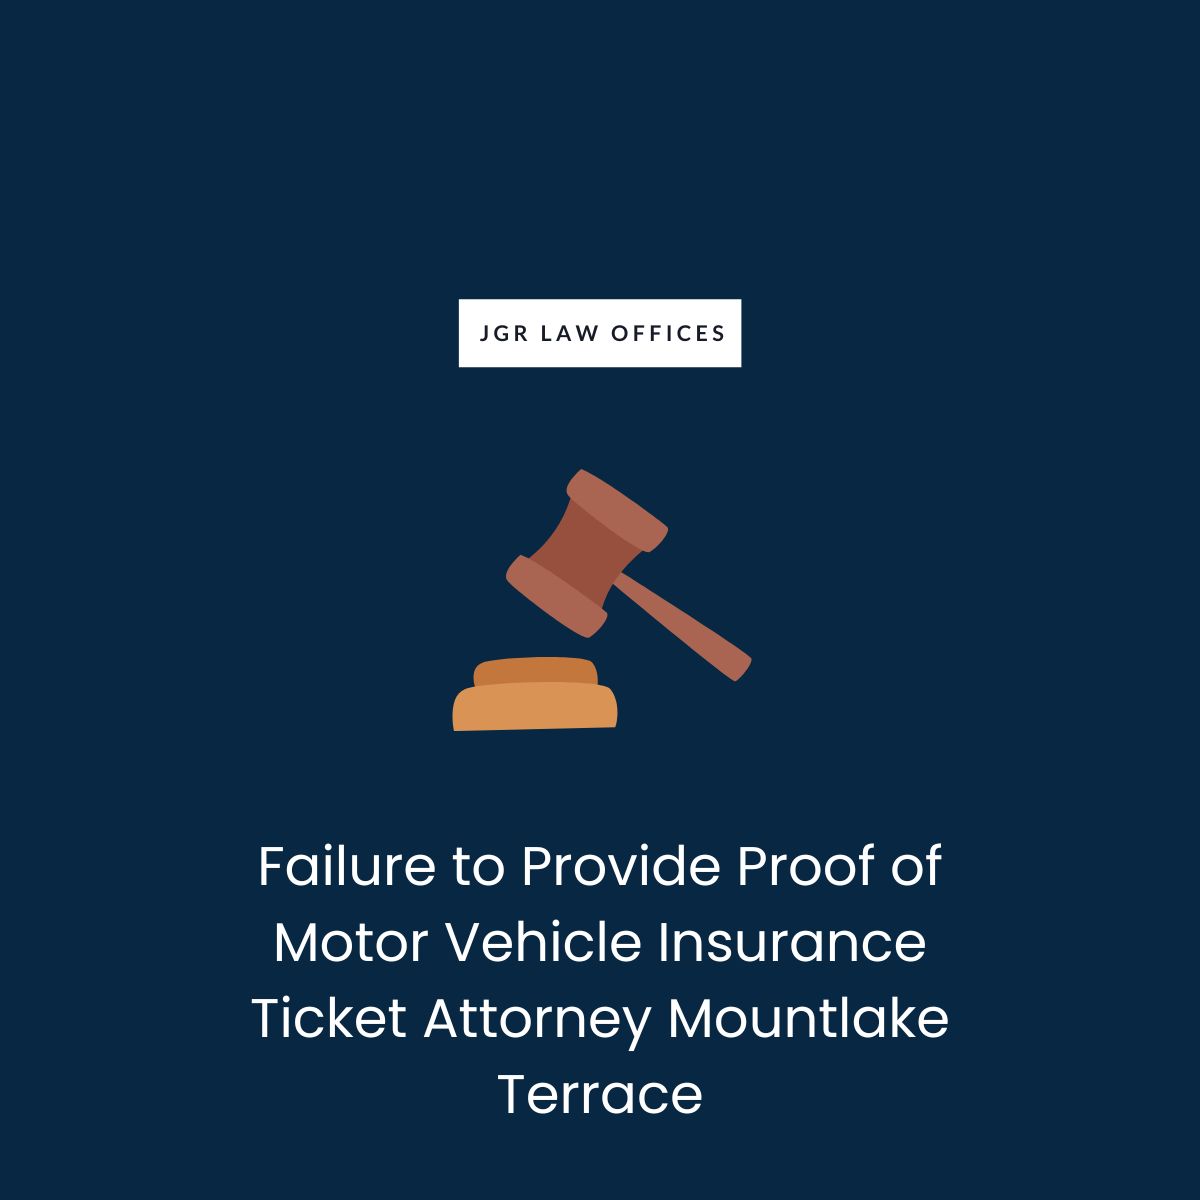 Failure to Provide Proof of Motor Vehicle Insurance Ticket Attorney Mountlake Terrace